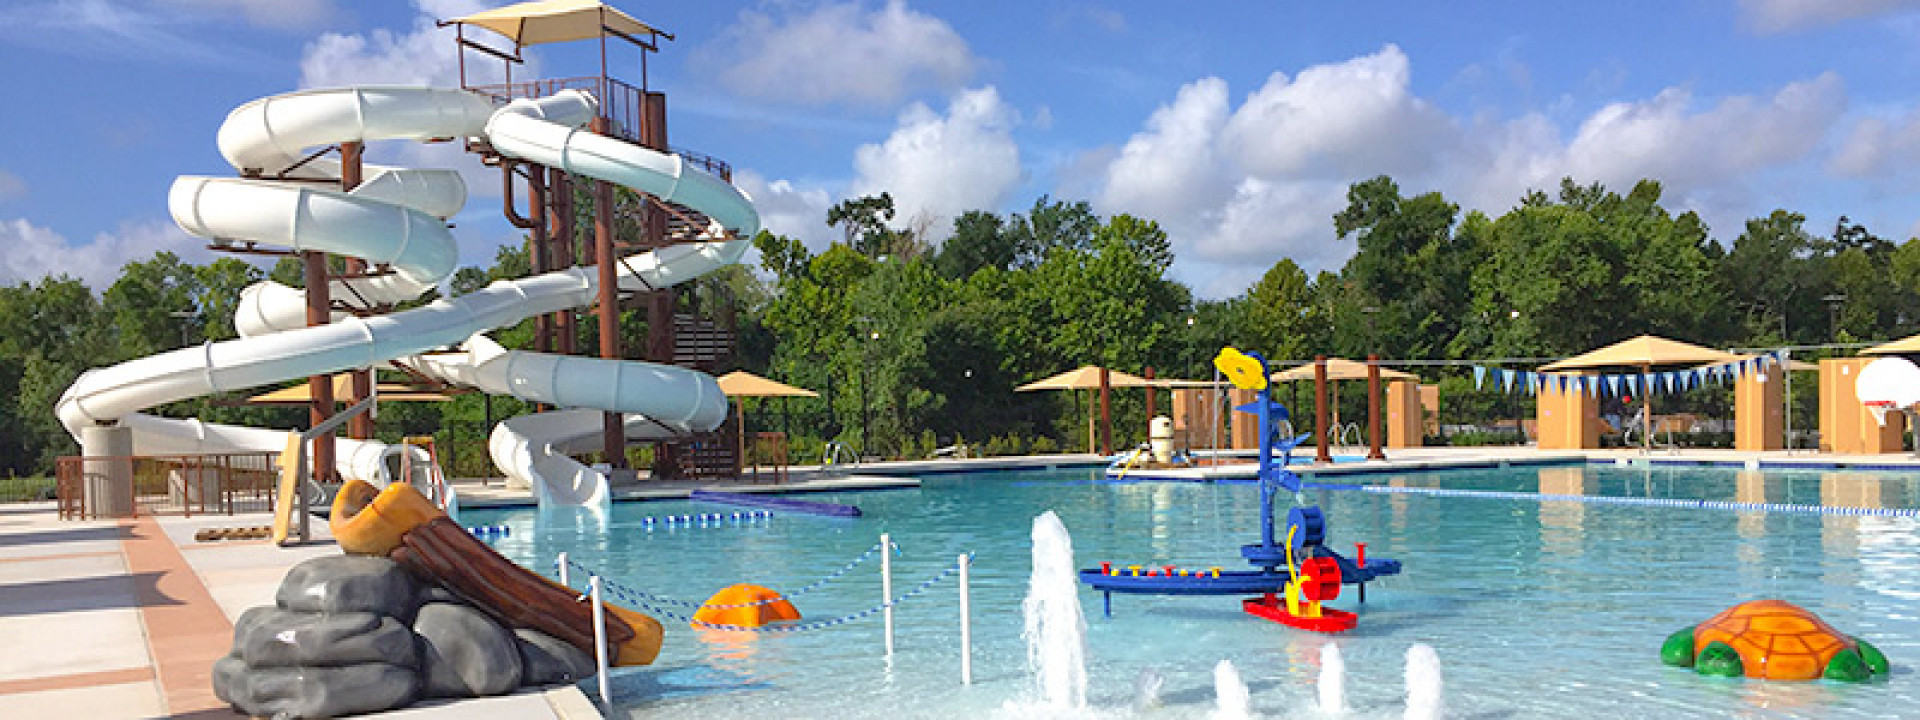 VillaSport Enjoys the Benefits of Relying on Partners for Their Waterslides and Aquatic Play Units